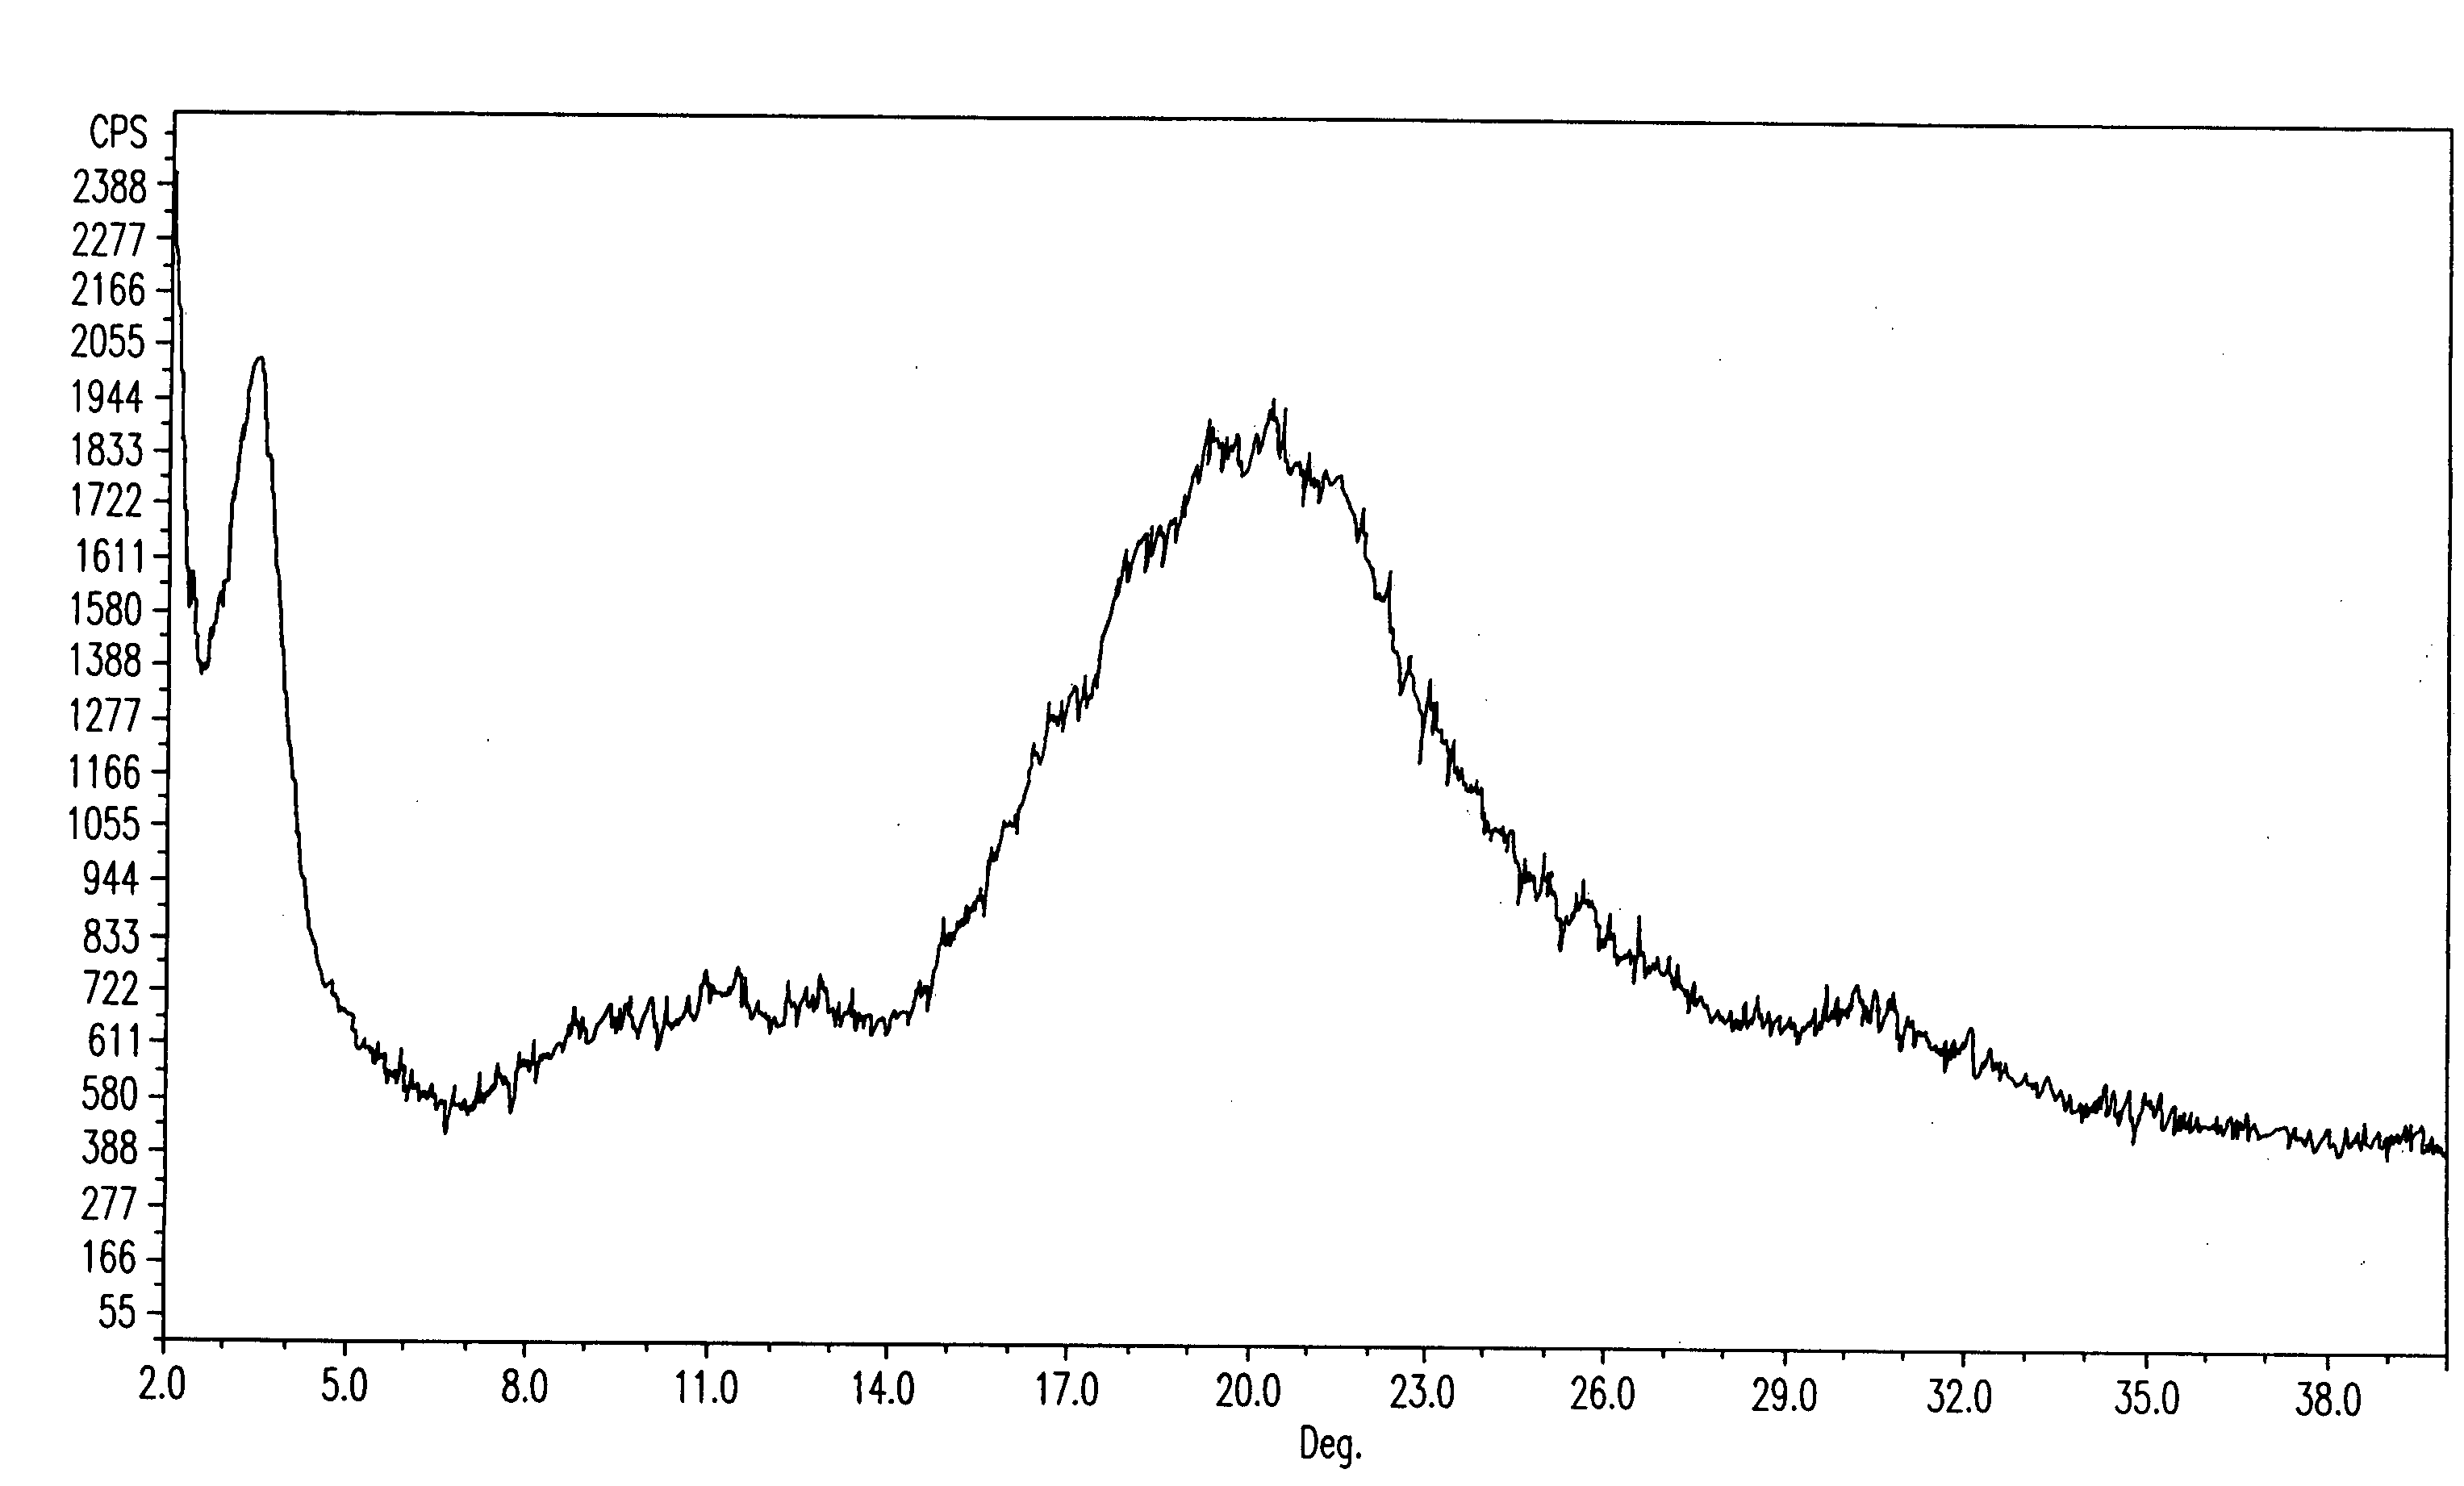 Fluvastatin sodium crystal forms, processes for preparing them, compositions containing them and methods of using them